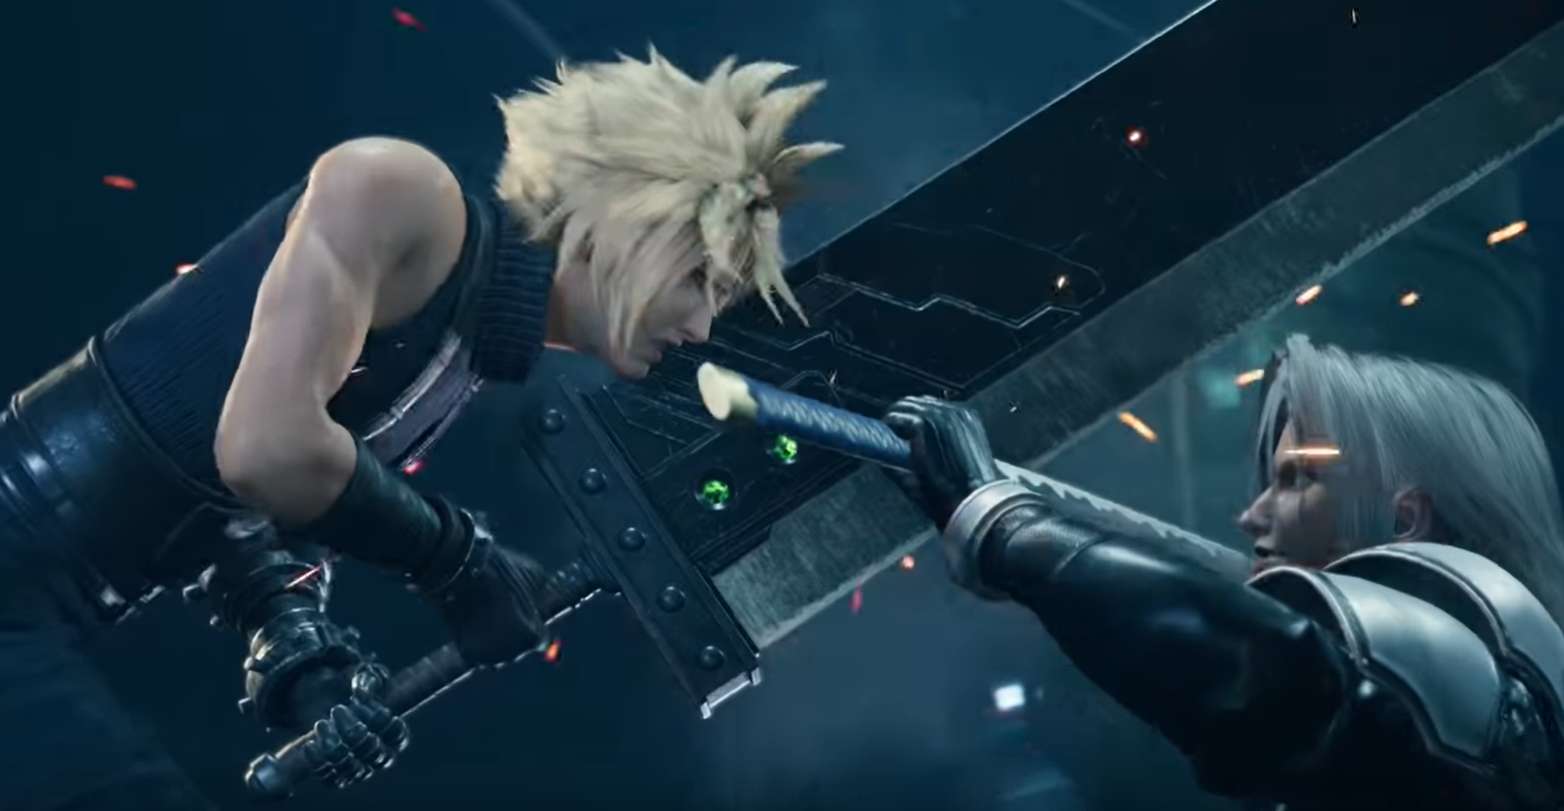 New Final Fantasy VII Remake Trailer Reveals A Ton Of Major Characters And Story Elements